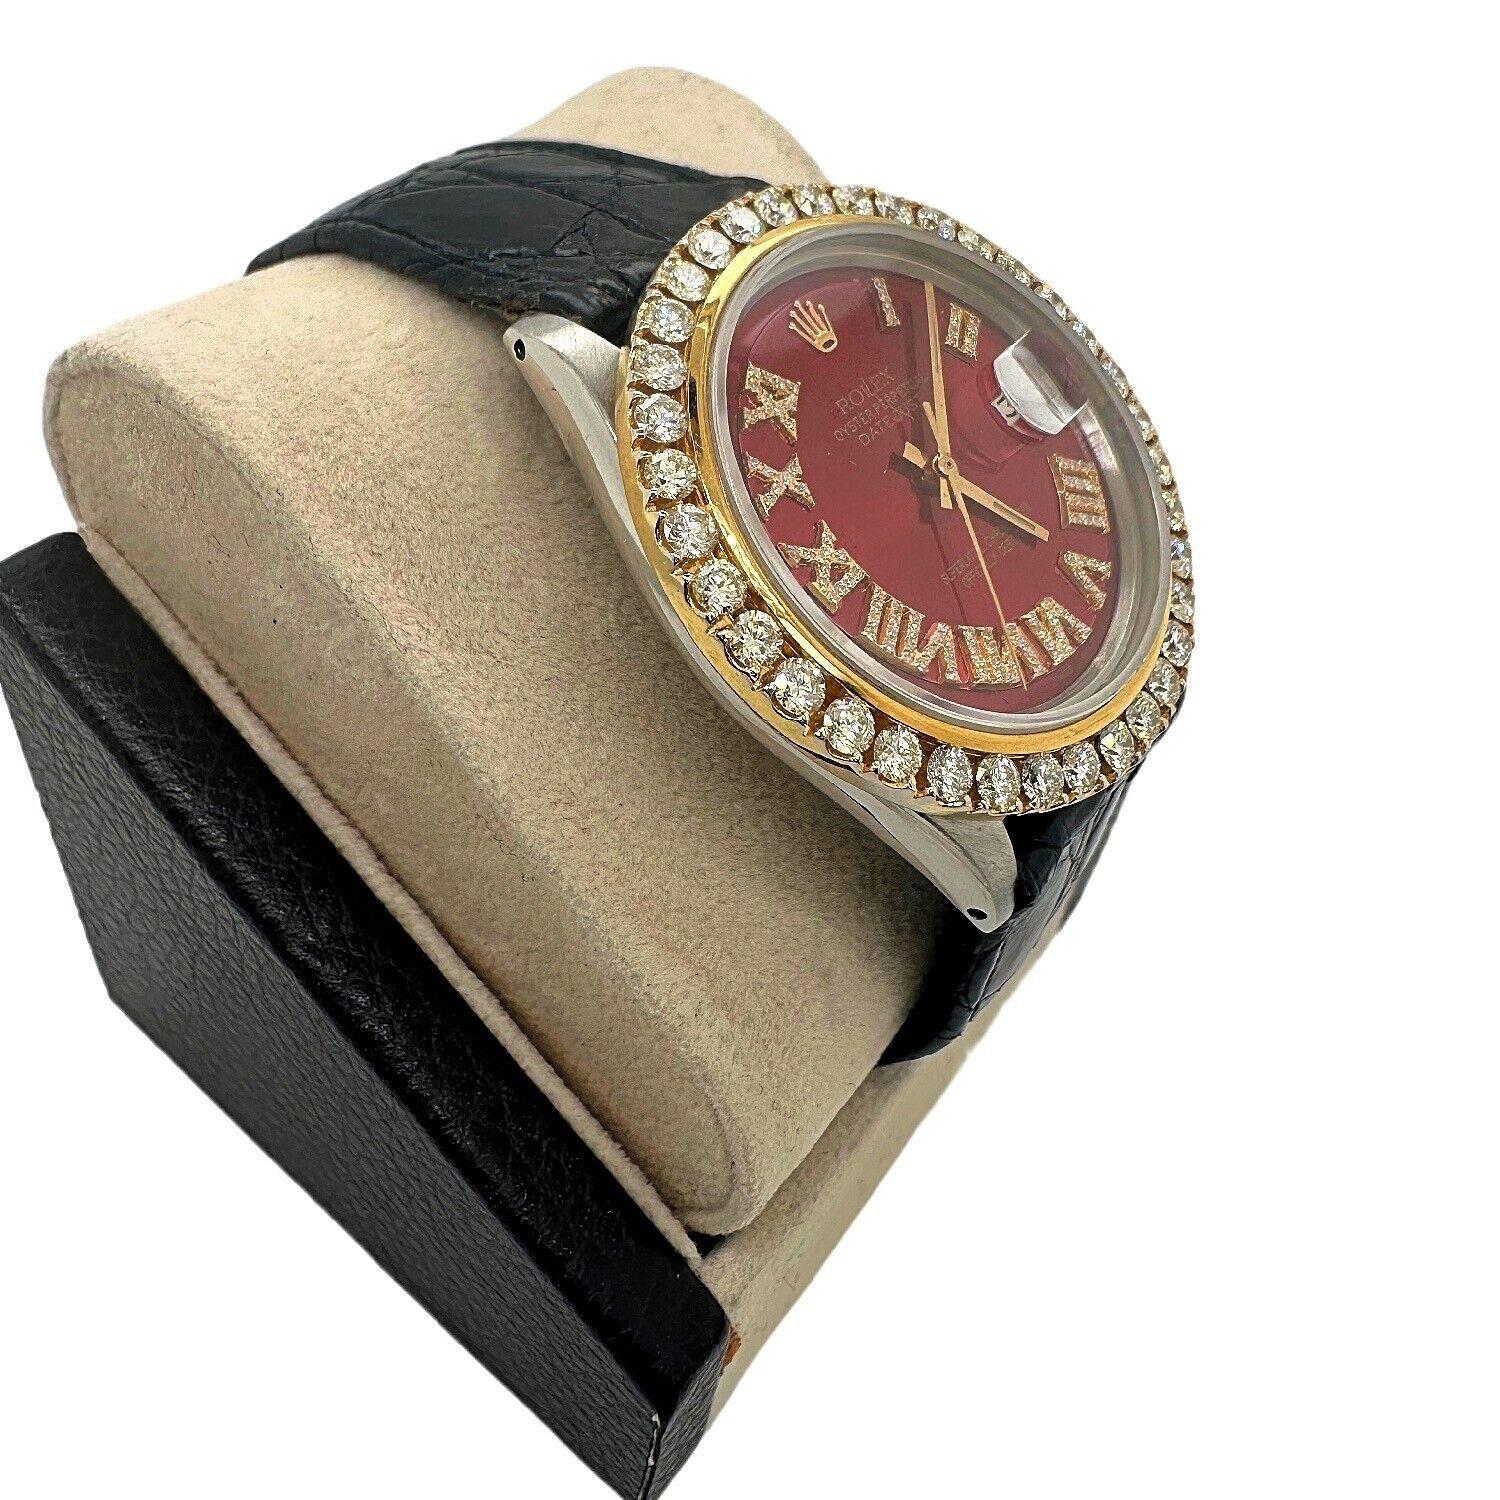 Rolex Datejust 1601 Red Diamond Dial Bezel 18K Gold Steel Leather Strap In Excellent Condition For Sale In San Diego, CA